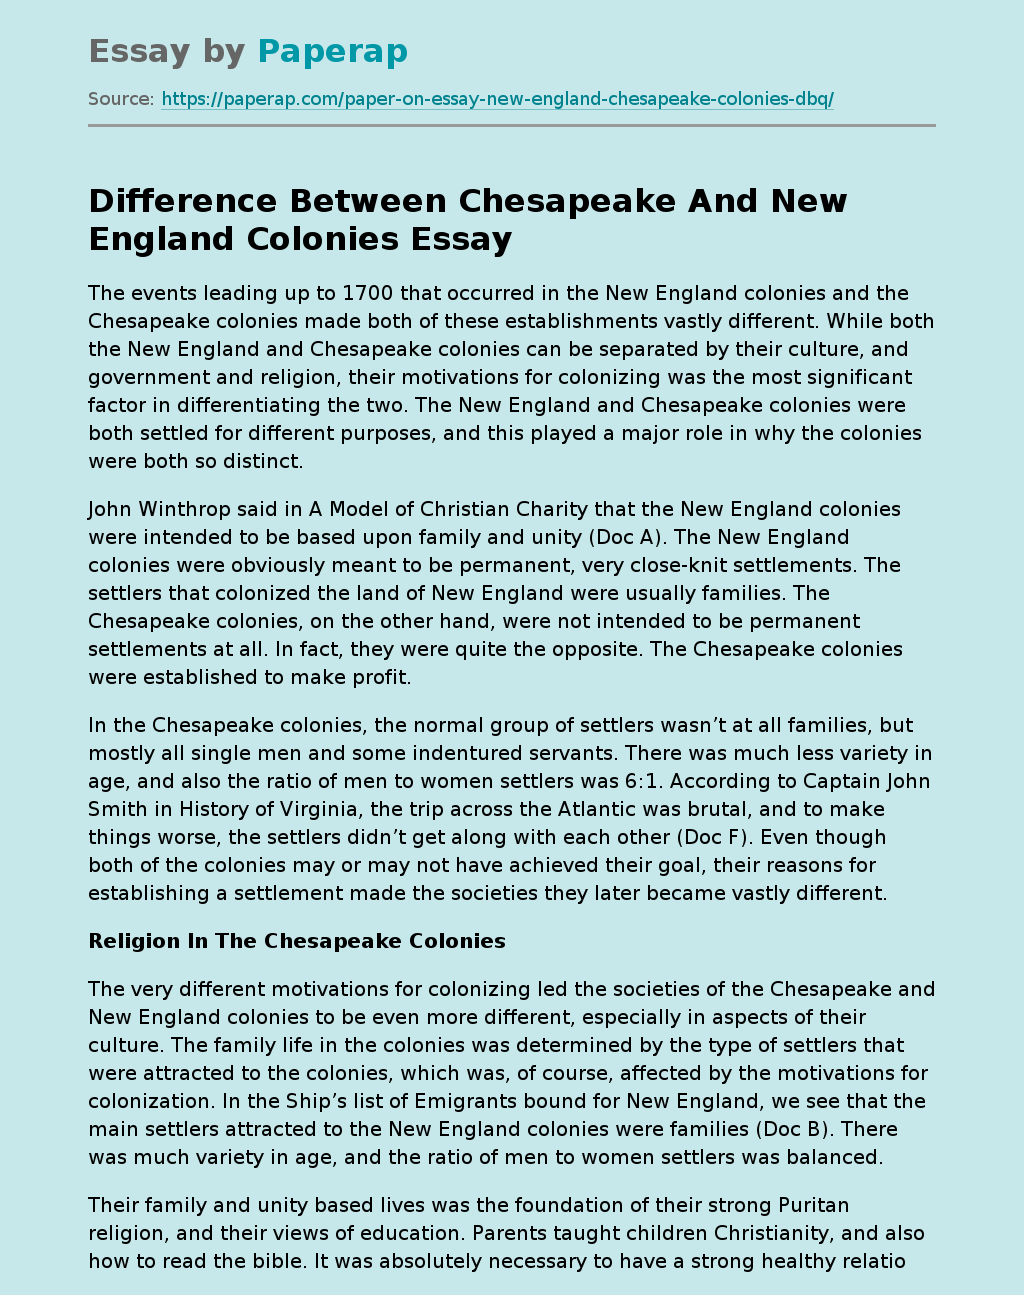 Difference Between Chesapeake And New England Colonies